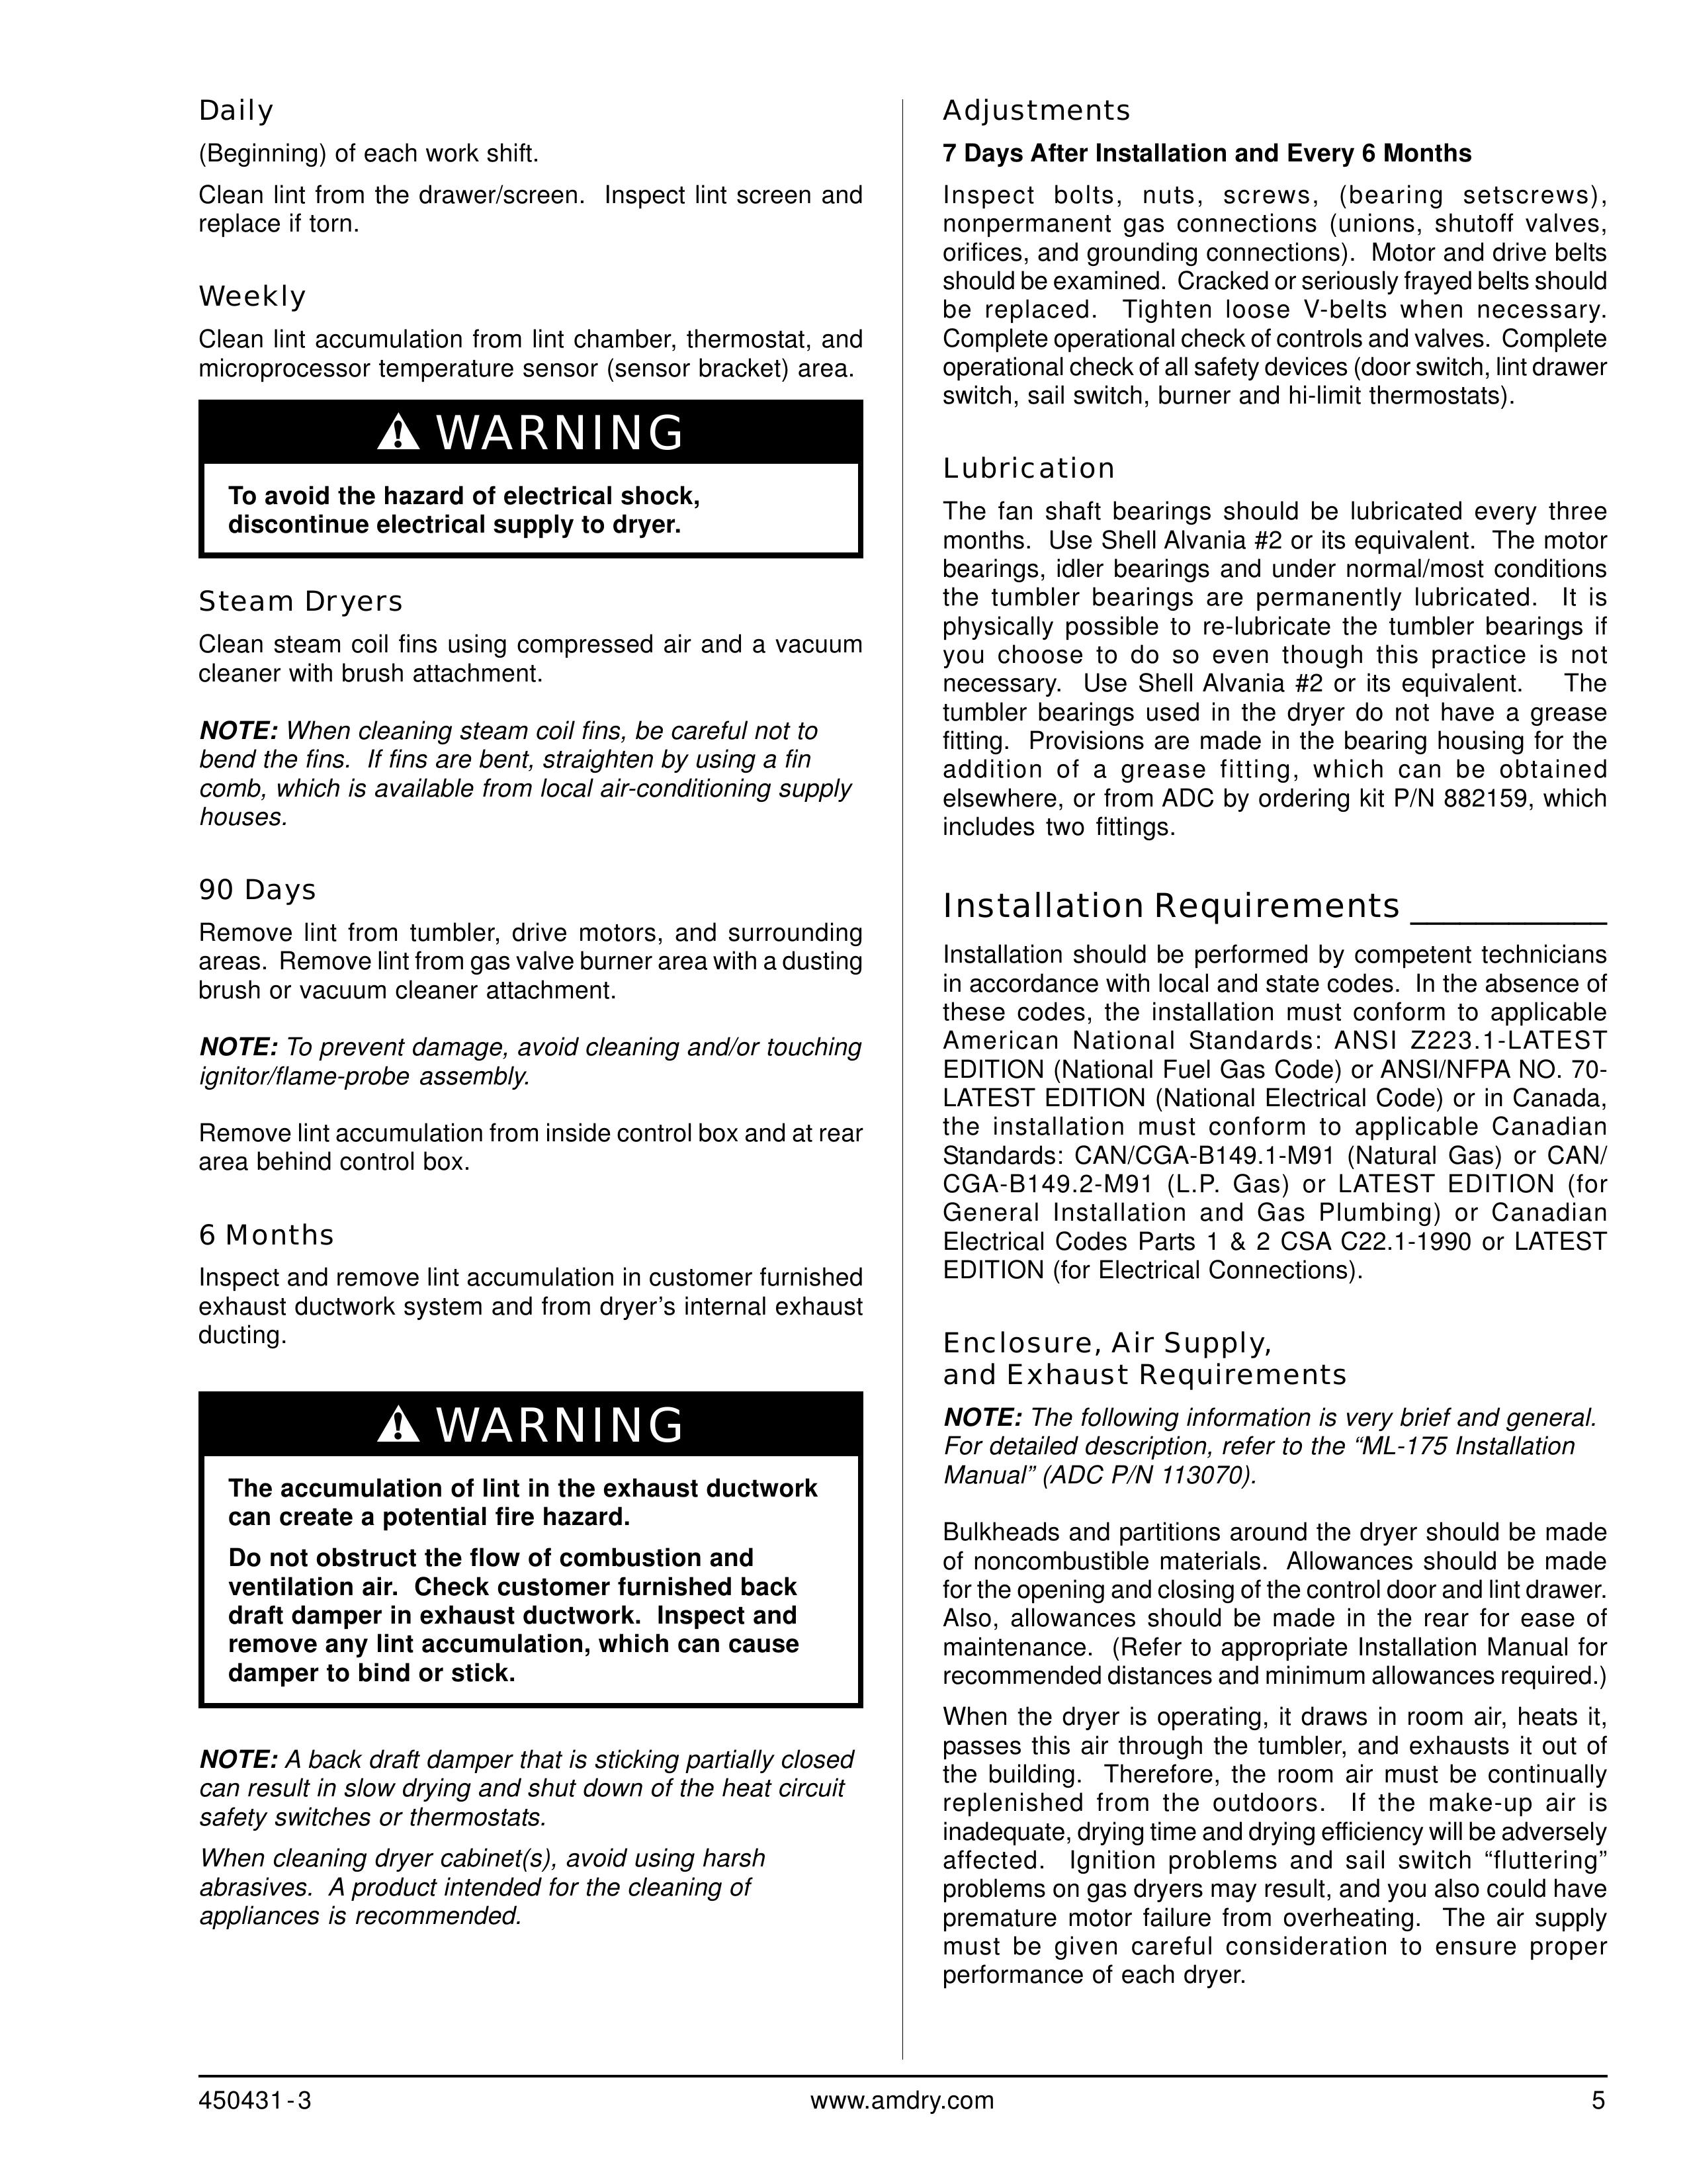 ADC ML-190 Clothes Dryer User Manual (Page 5)